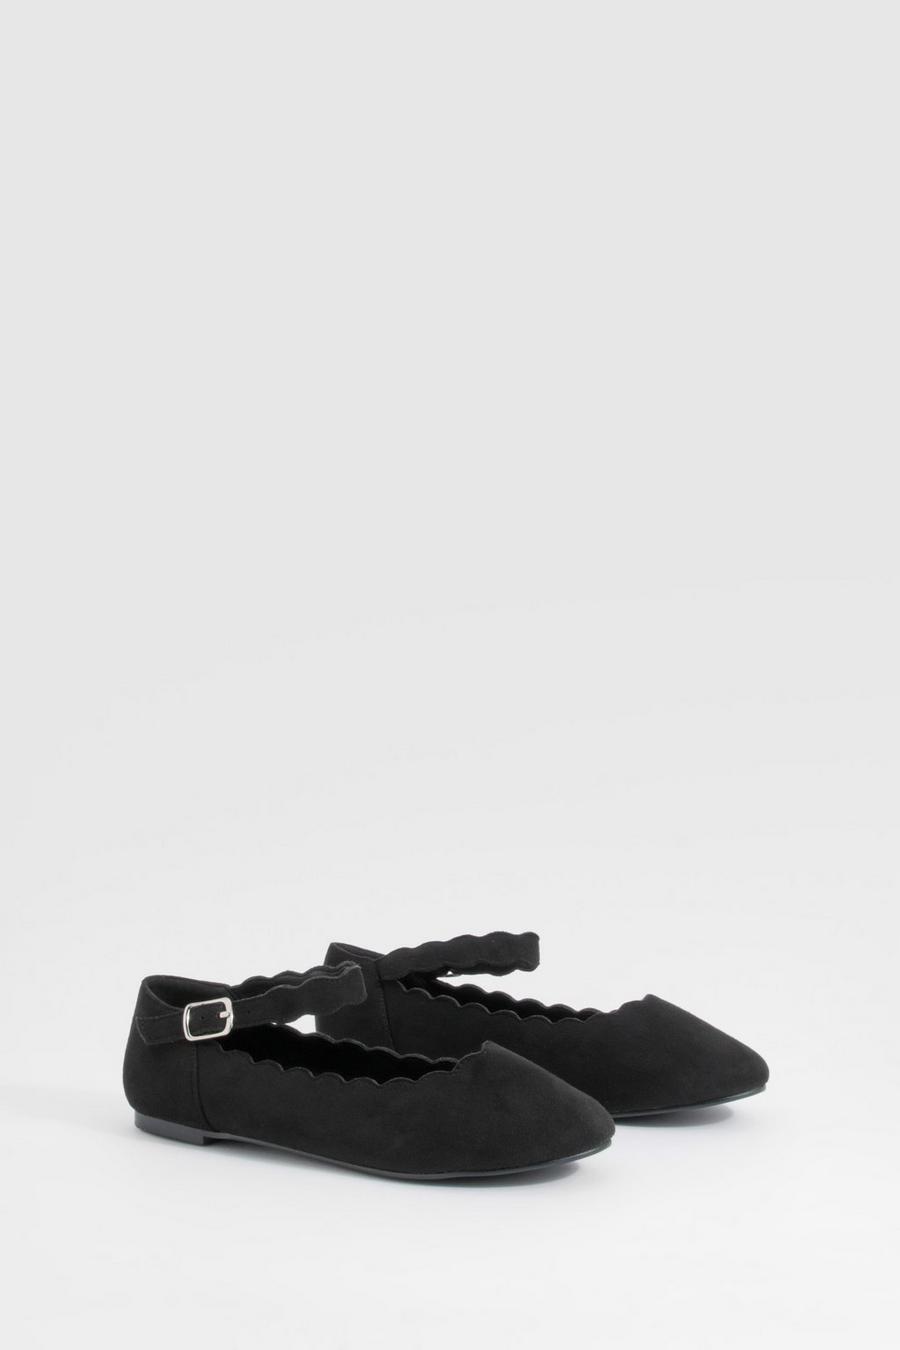 Black Wide Fit Scallop Edge hes Flats